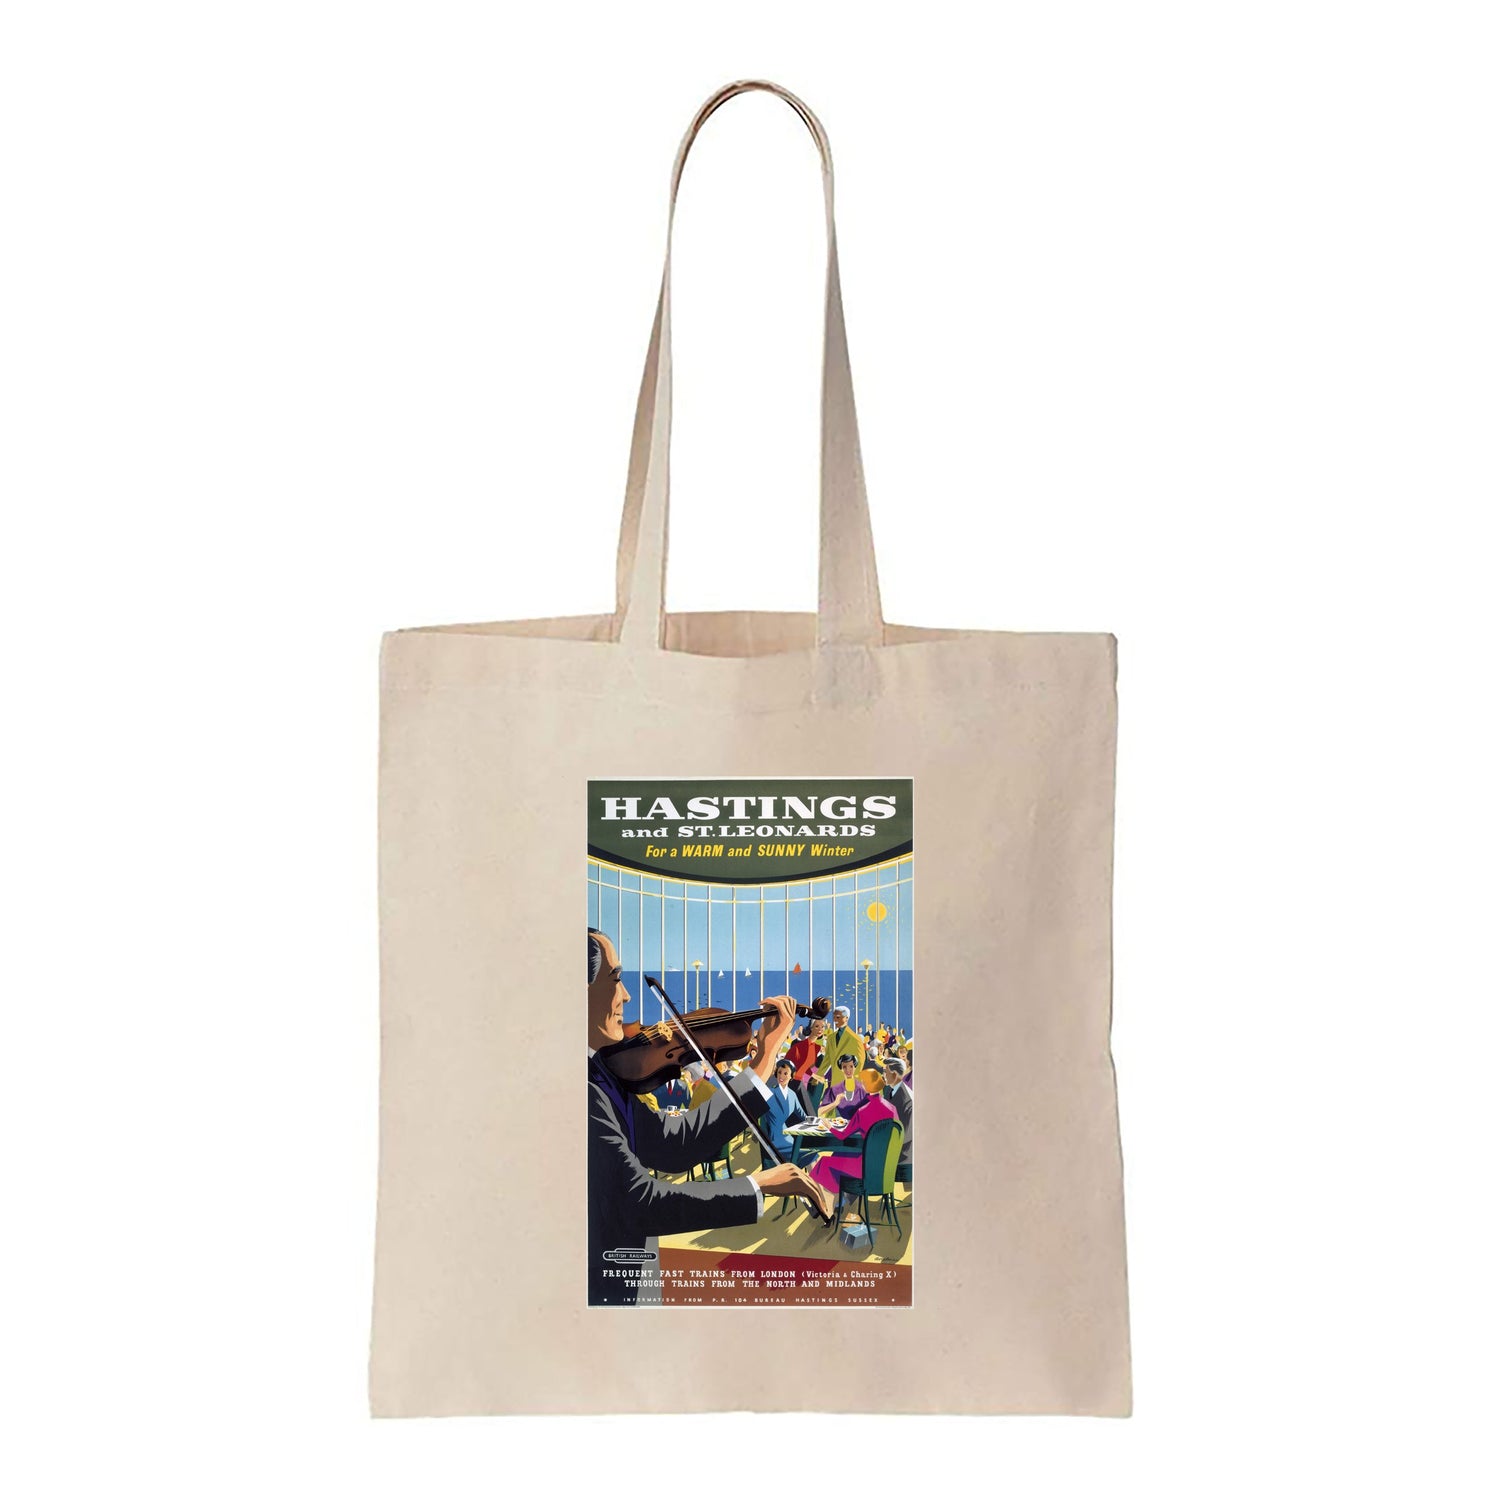 Hastings and St Leonards, Warm and Sunny Winter - Canvas Tote Bag